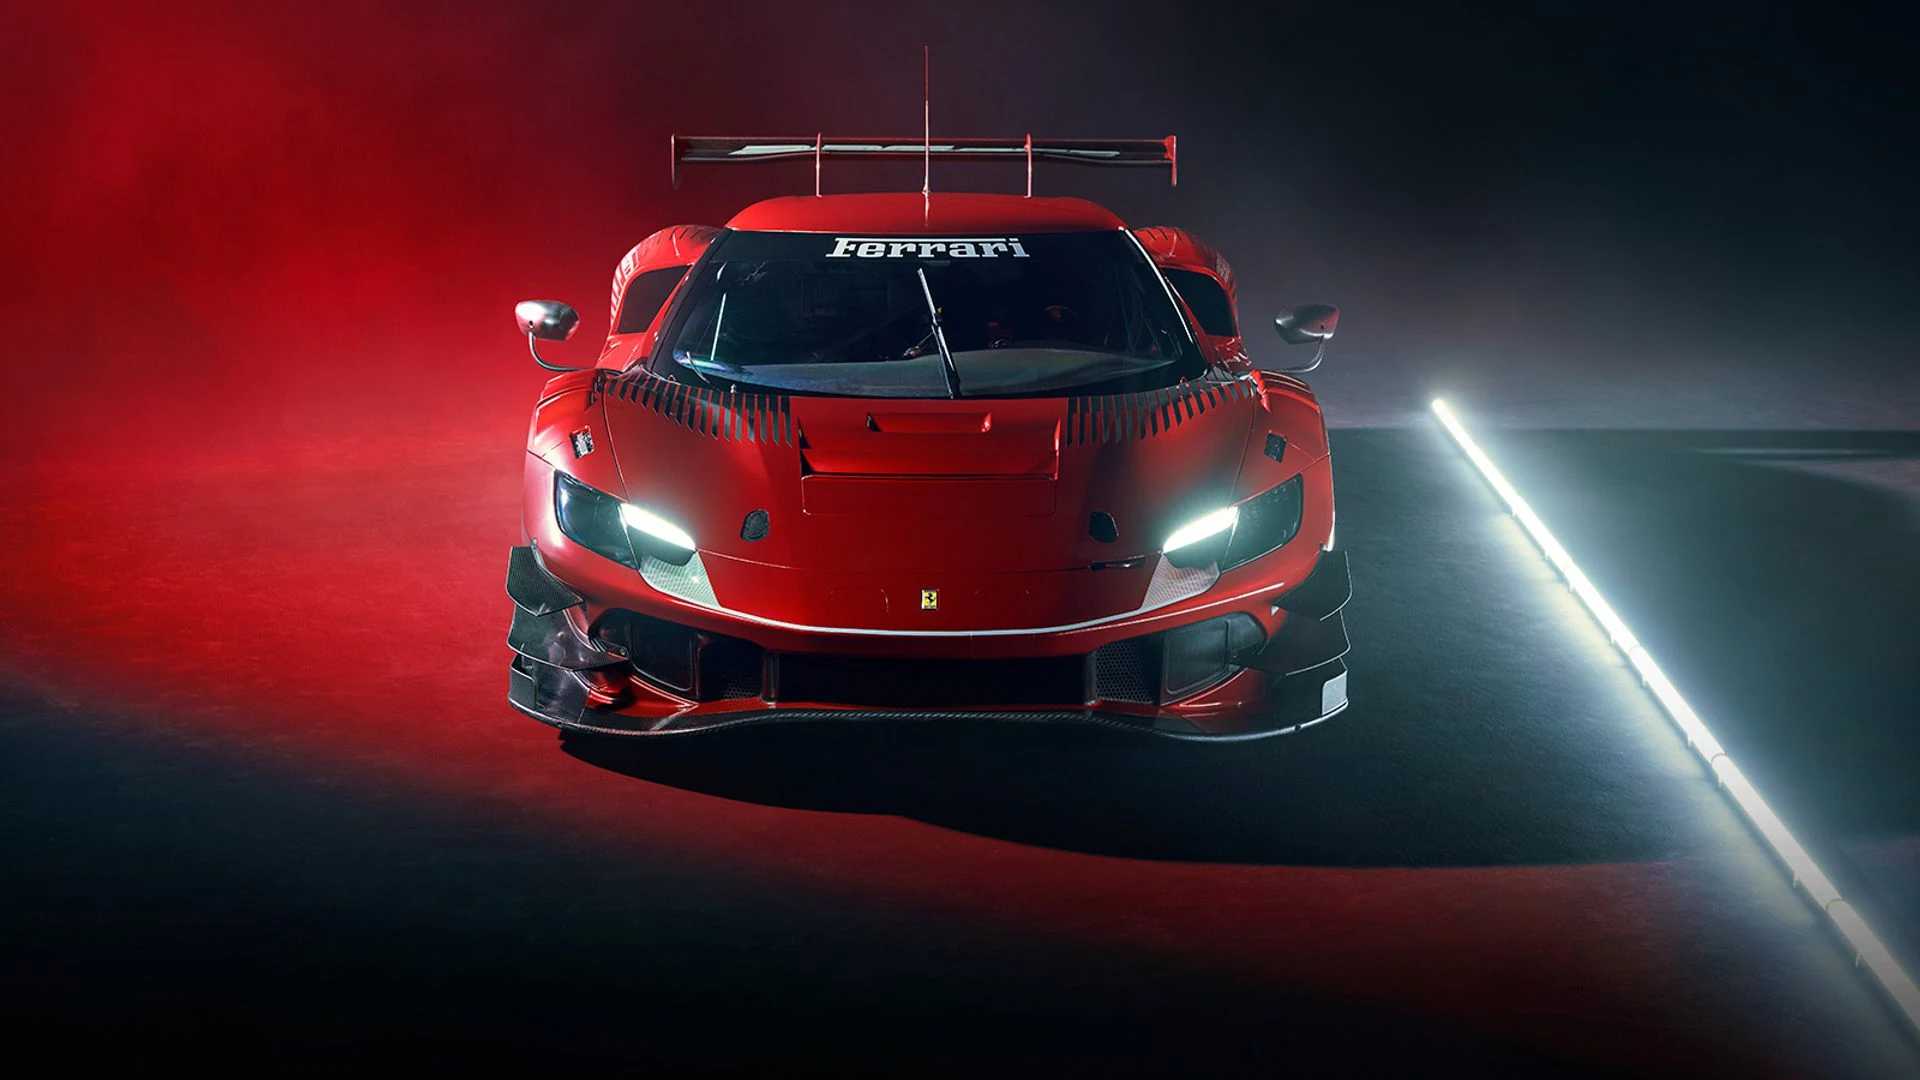 Most Asked Assetto Corsa Competizione Questions Answered!